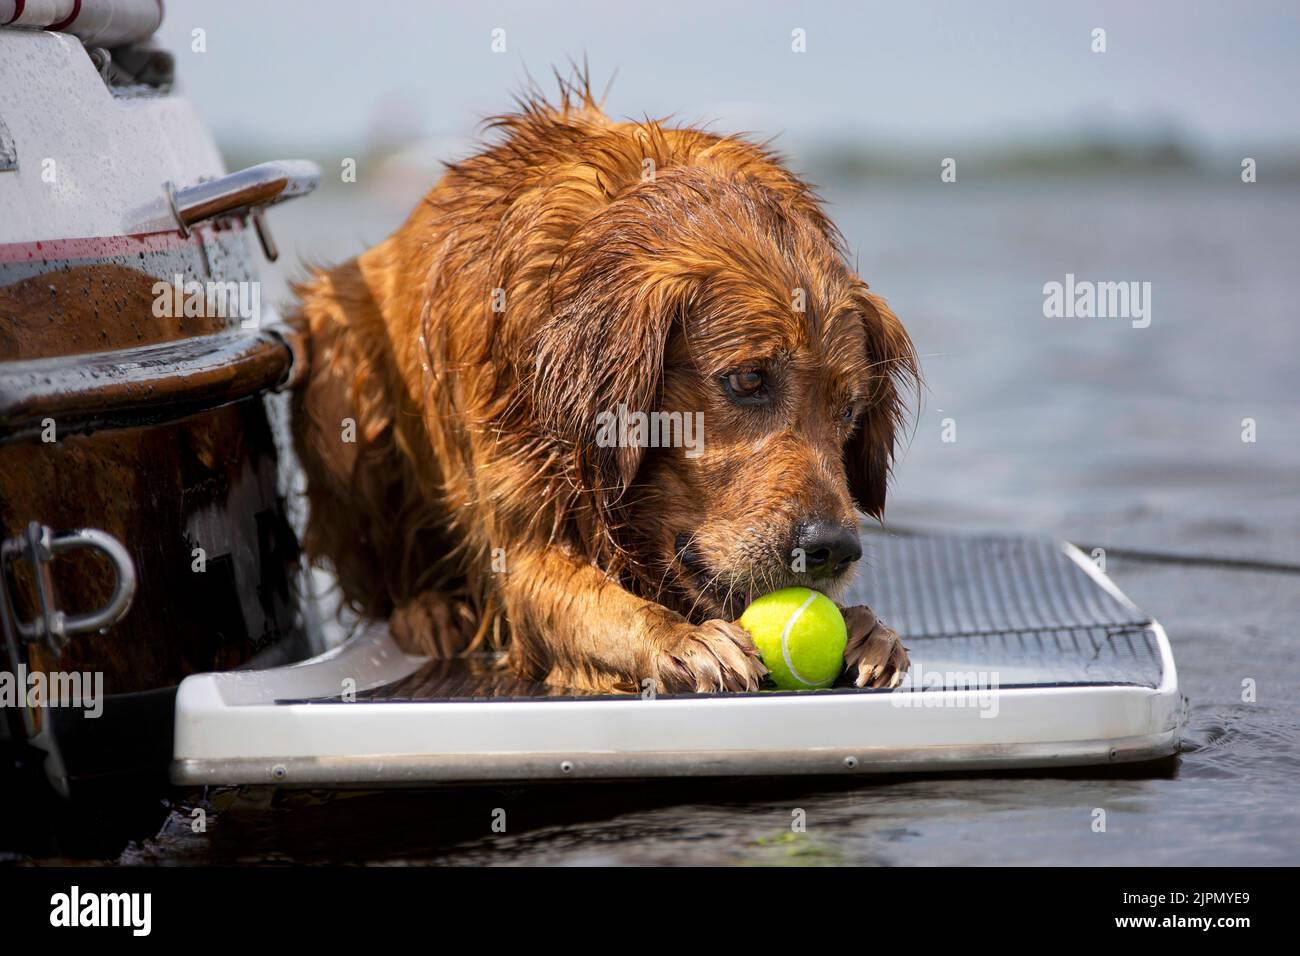 Golden retriever dog laying on the swim platform of a boat with a tennis ball. Stock Photo